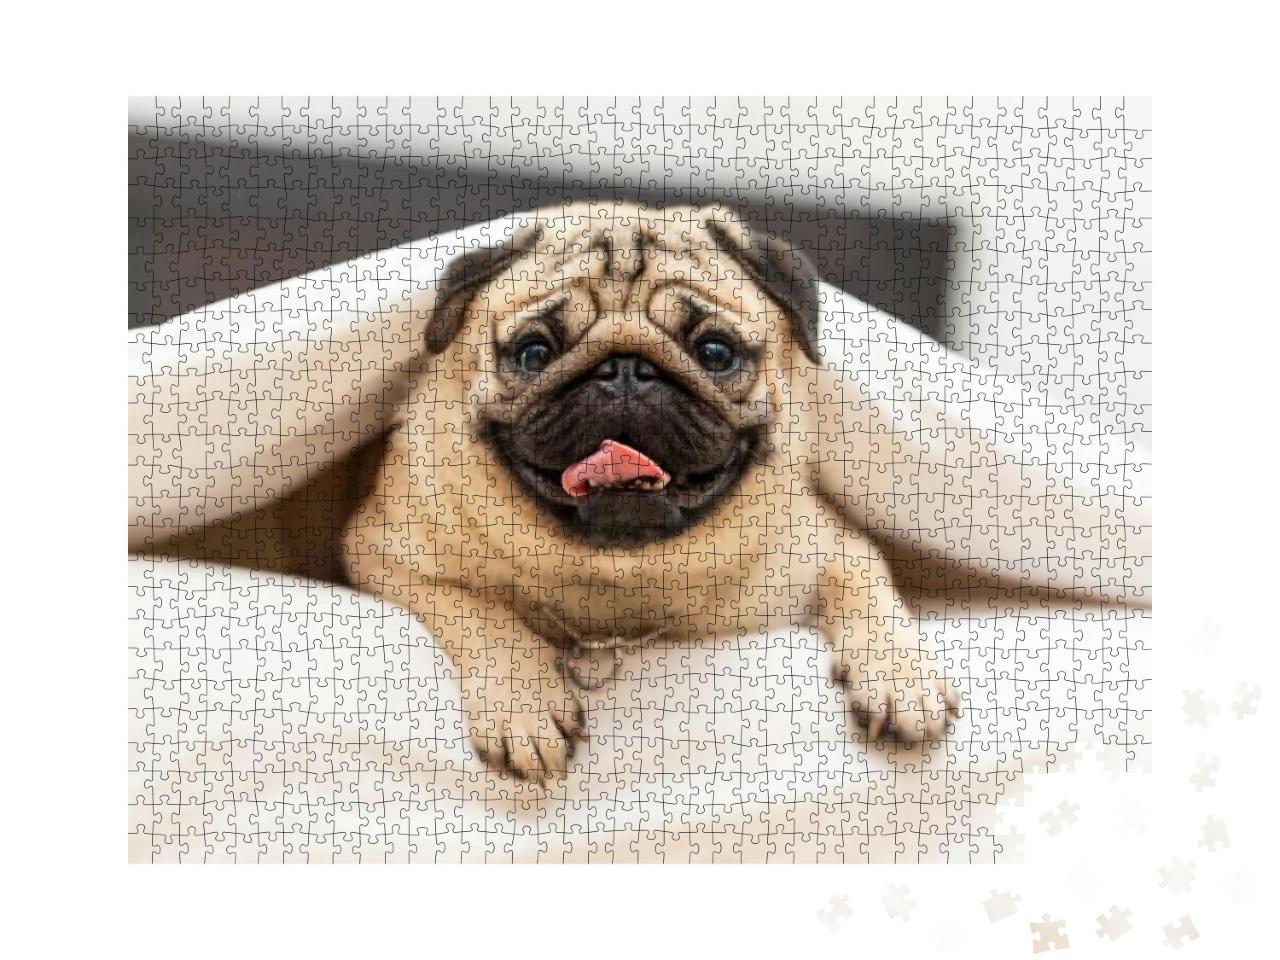 Cute Pug Dog Breed Lying in Blanket on White Bed in Cozy... Jigsaw Puzzle with 1000 pieces